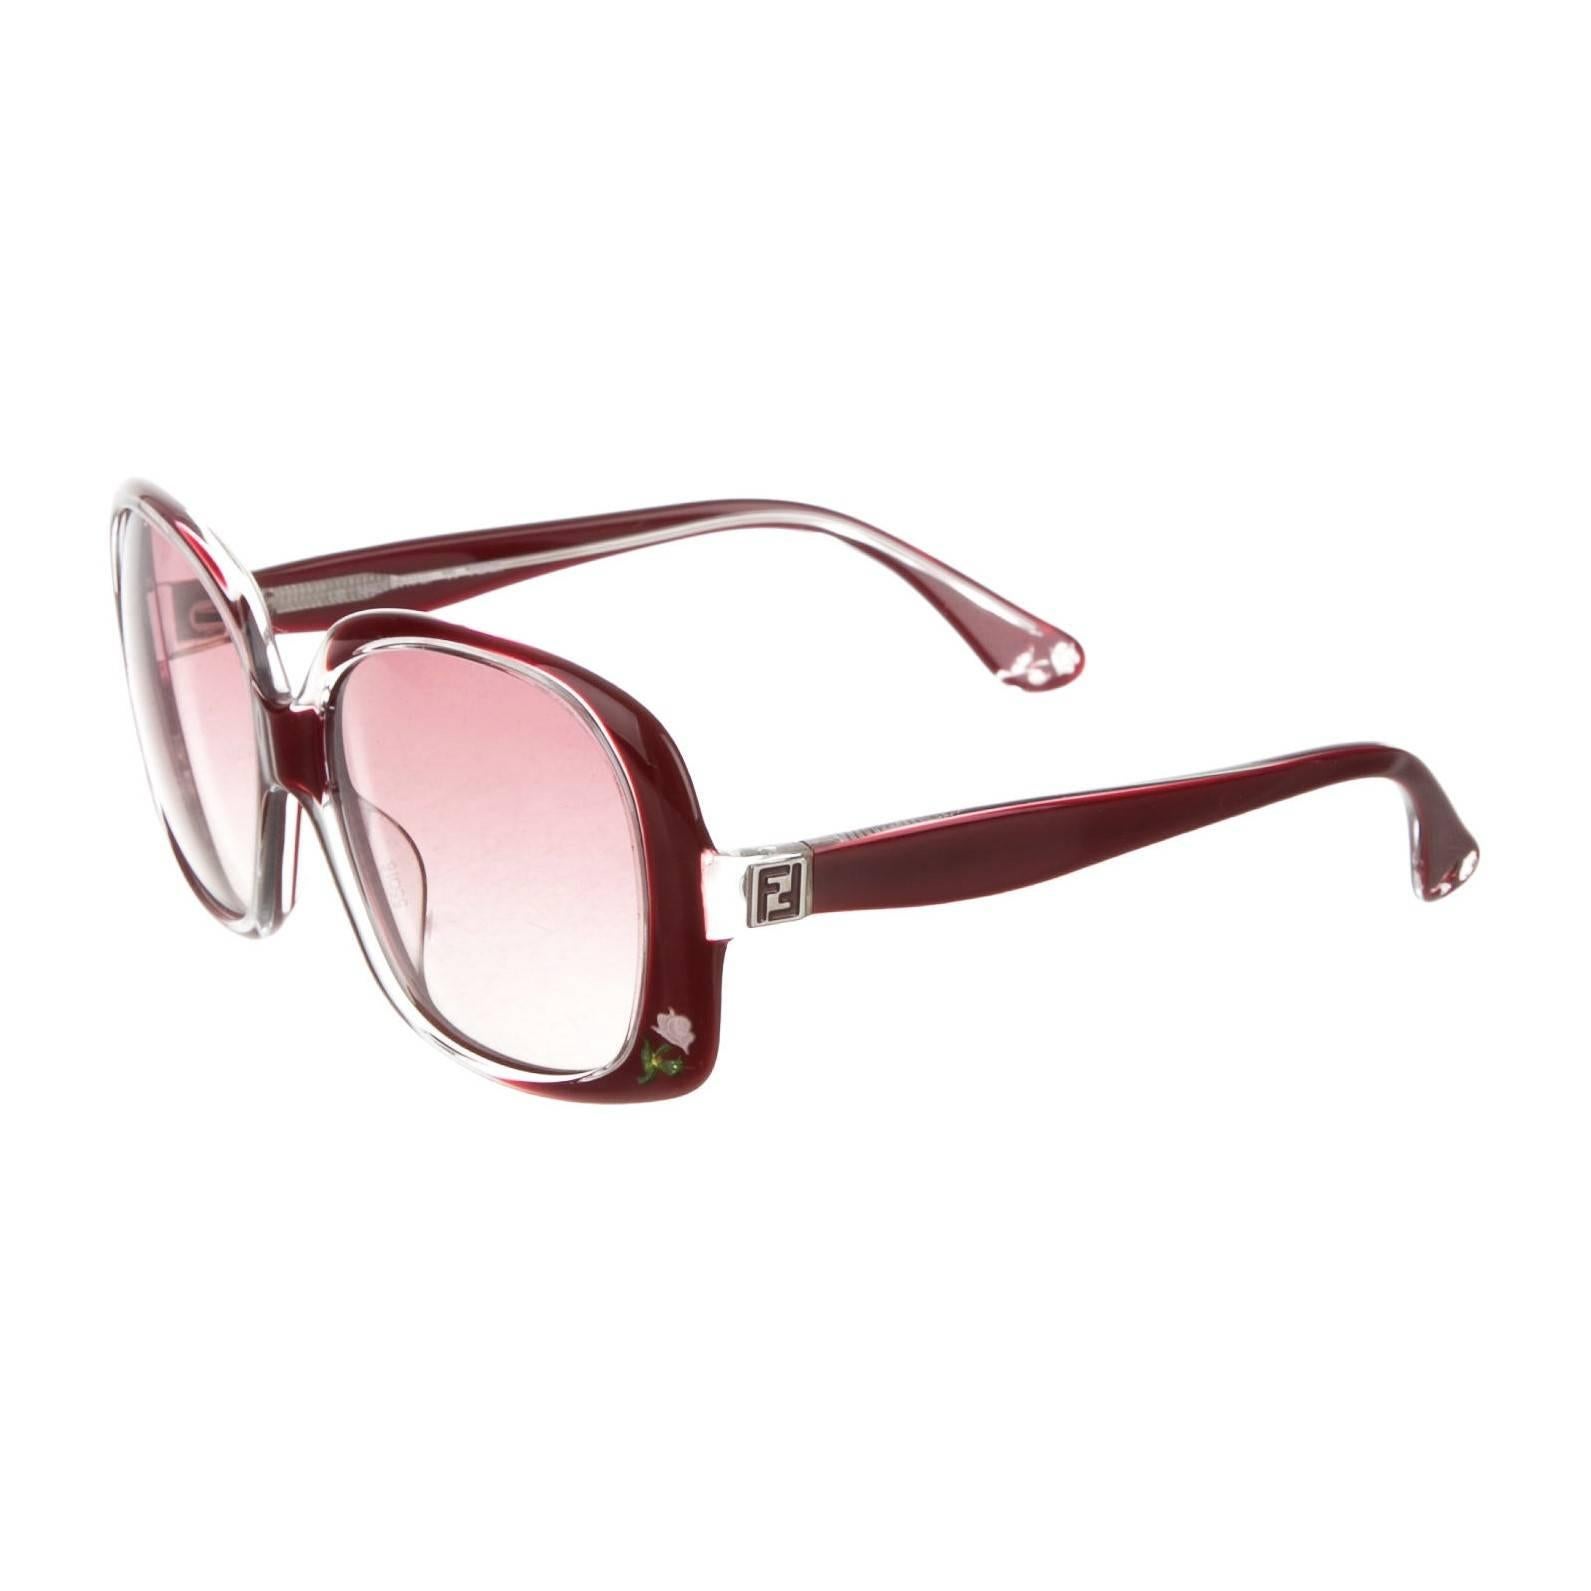 New Fendi Deep Red Rose Inlaid Sunglasses With Case 10